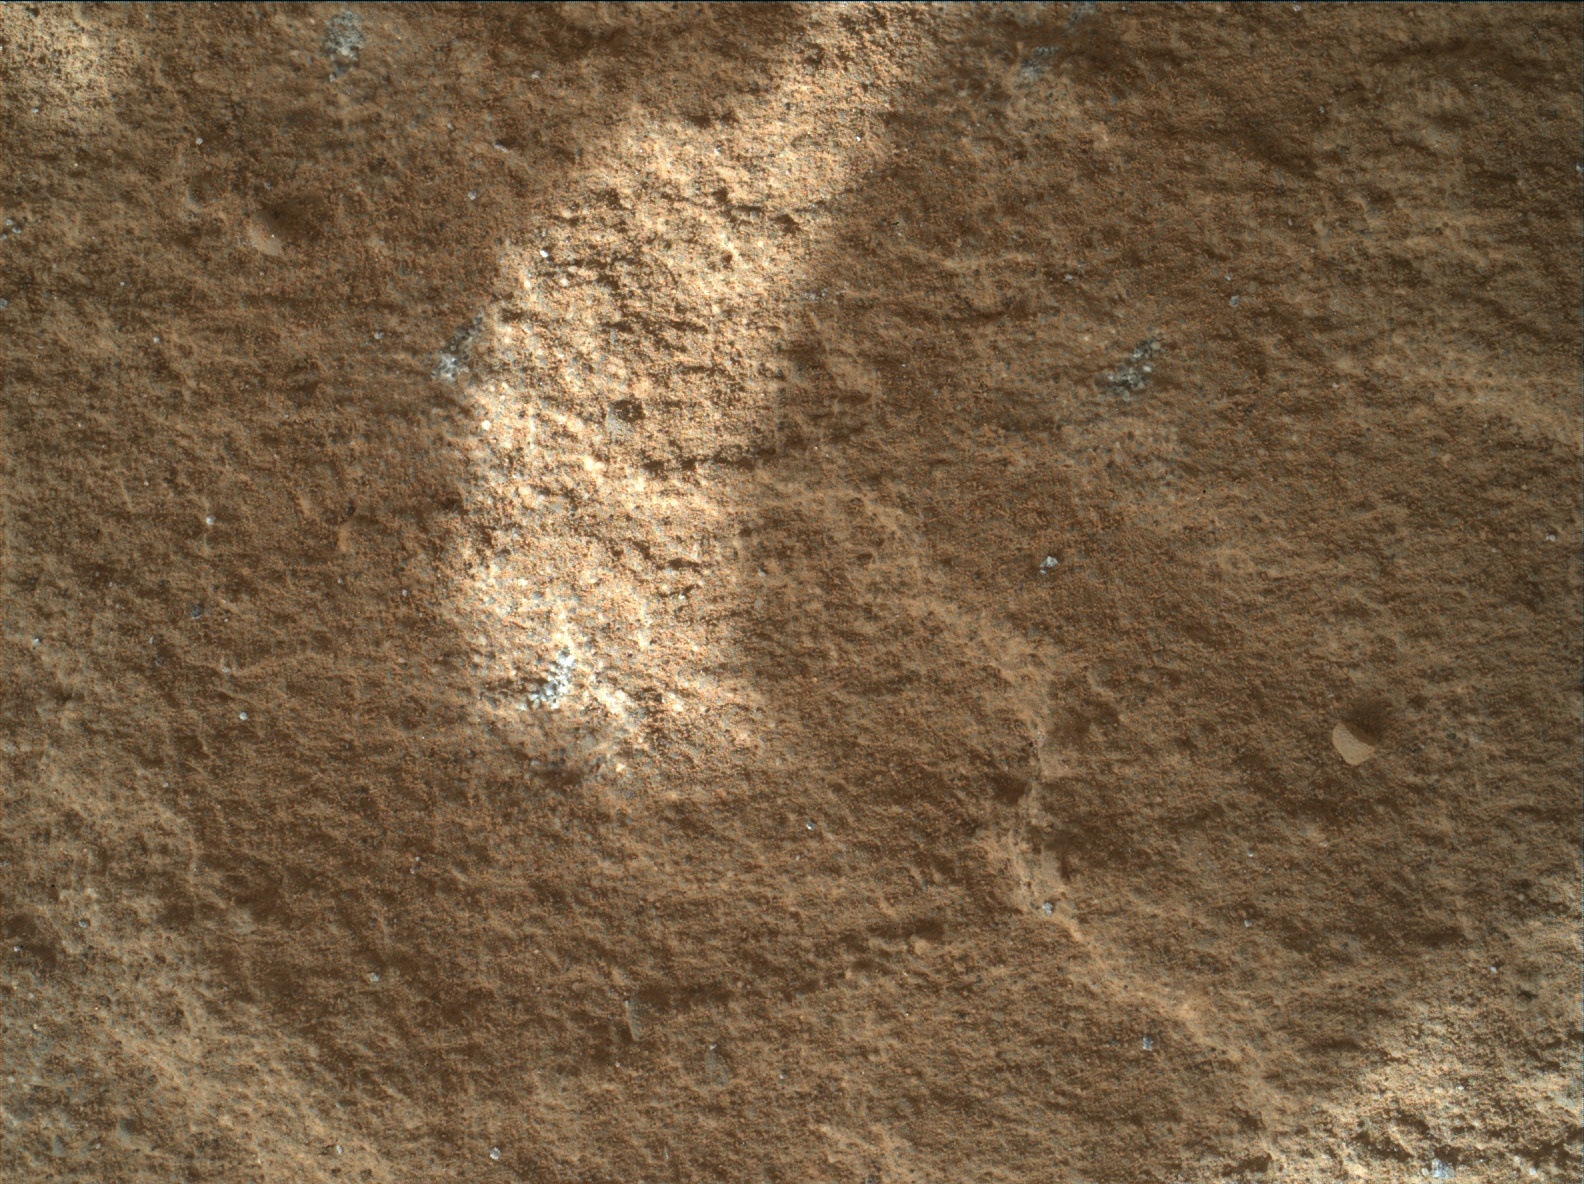 Nasa's Mars rover Curiosity acquired this image using its Mars Hand Lens Imager (MAHLI) on Sol 1144